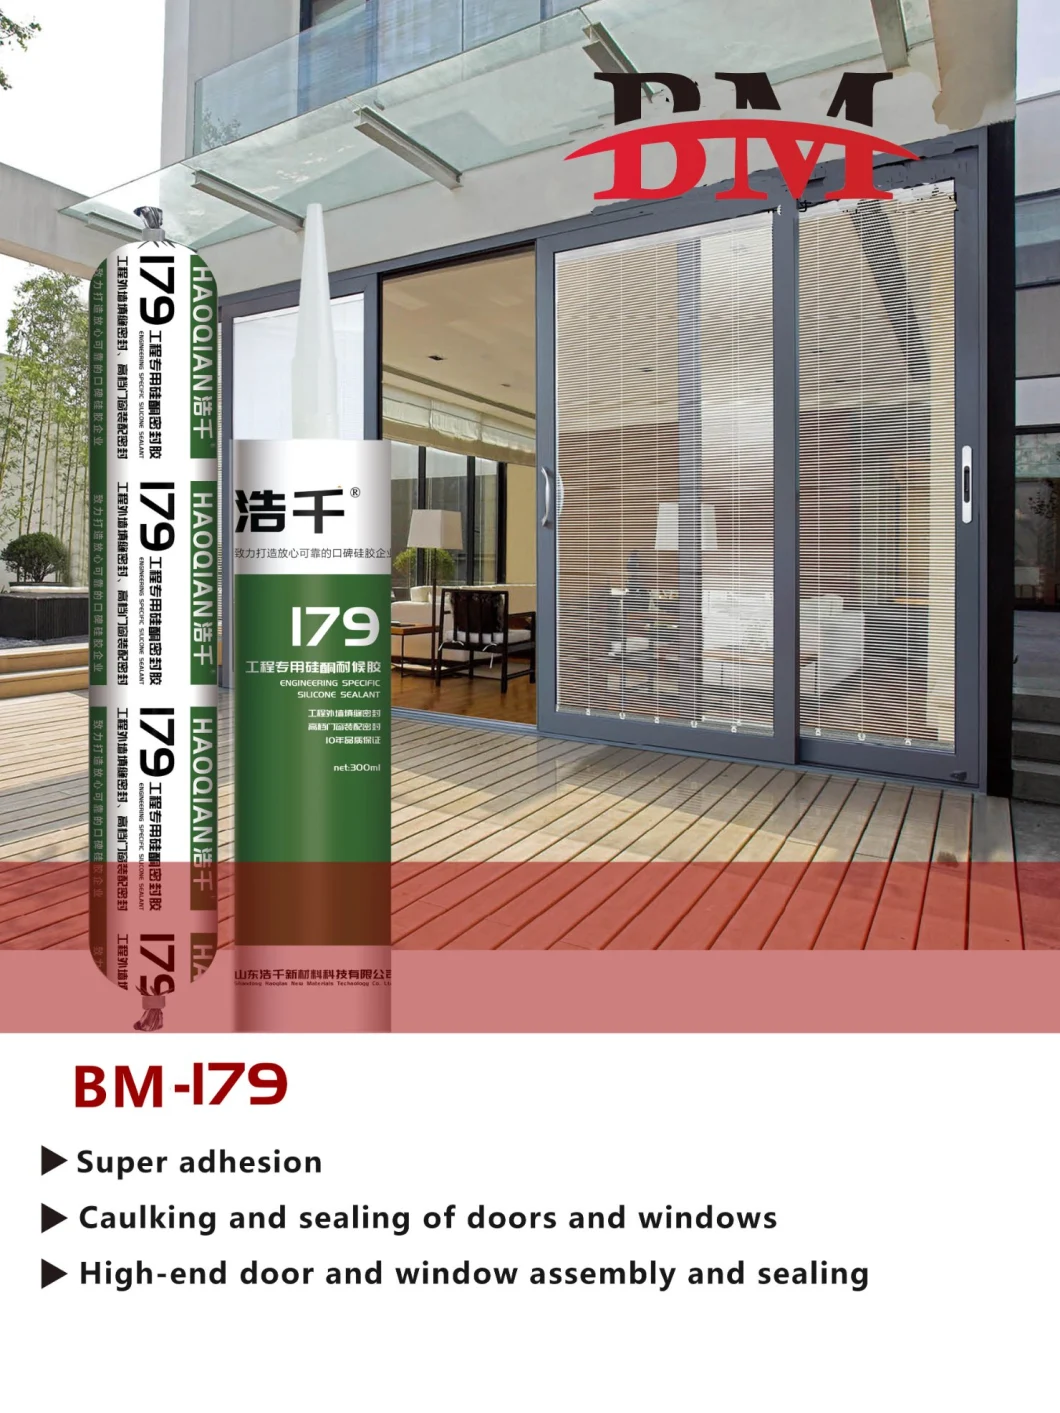 100% Gp General Purpose Neutral Silicone Sealant Adhesive Glue for Windows and Doors